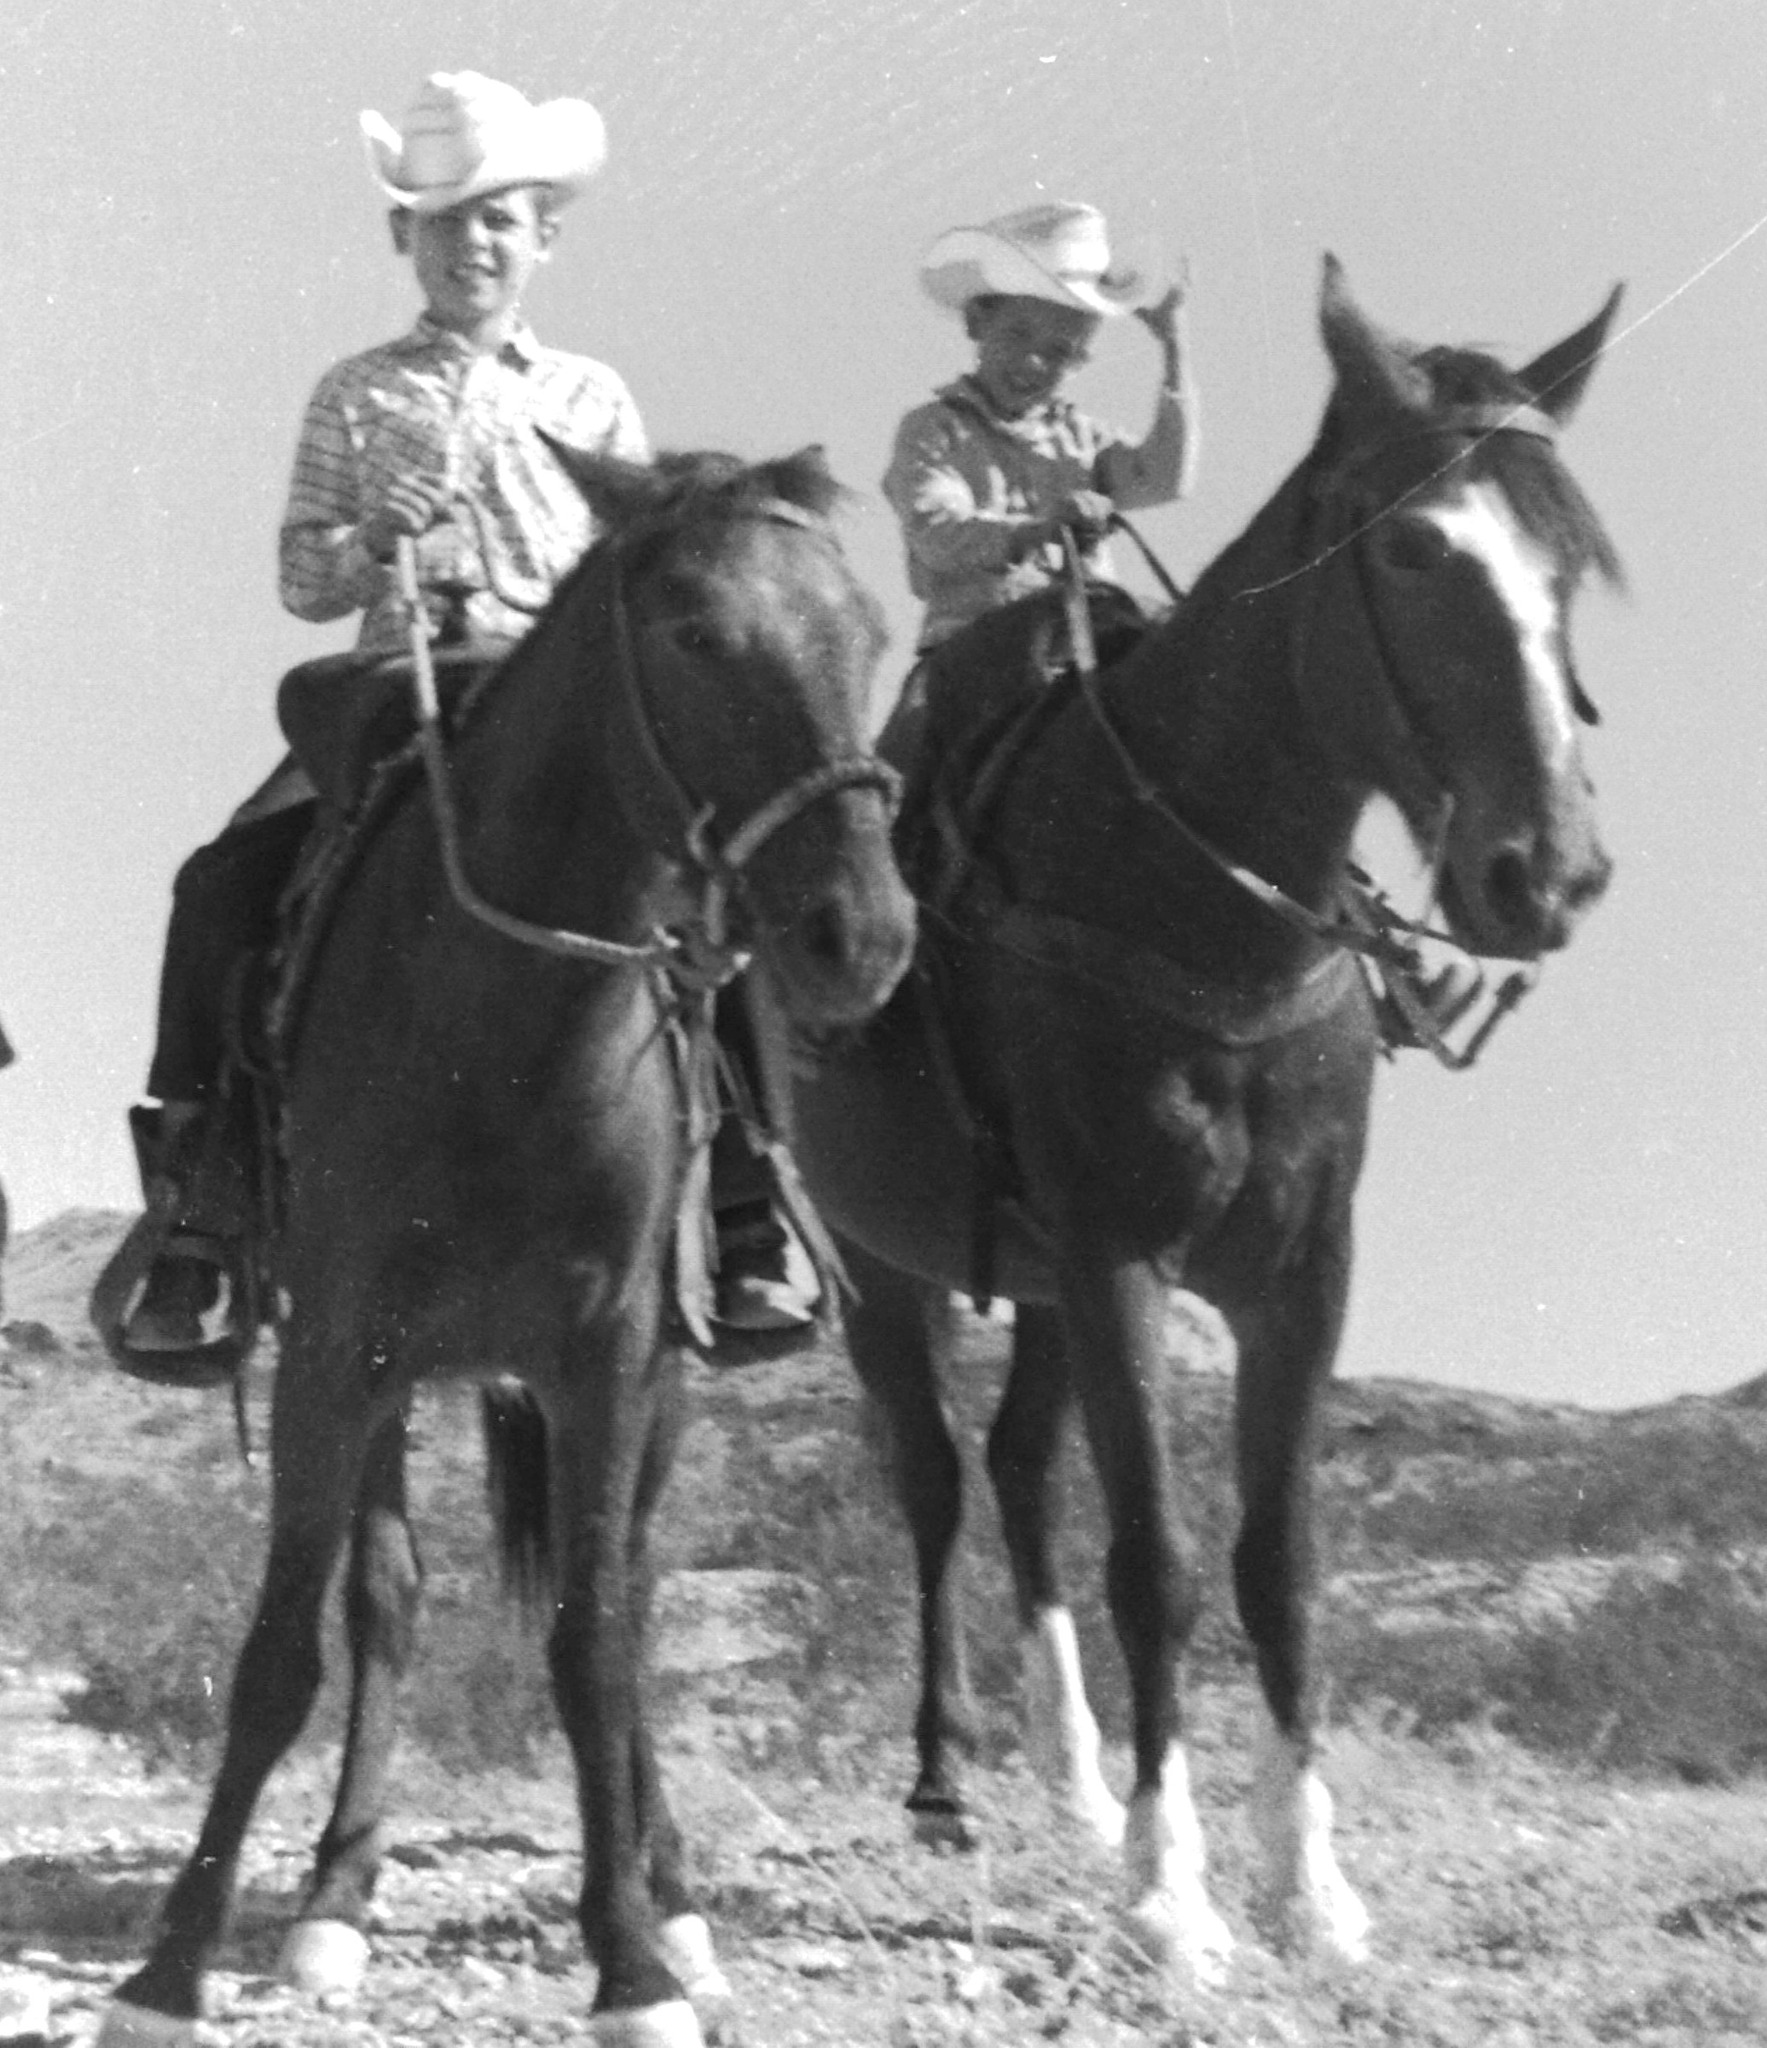 Black and white photo of two young boys in cowboy hats riding horses.